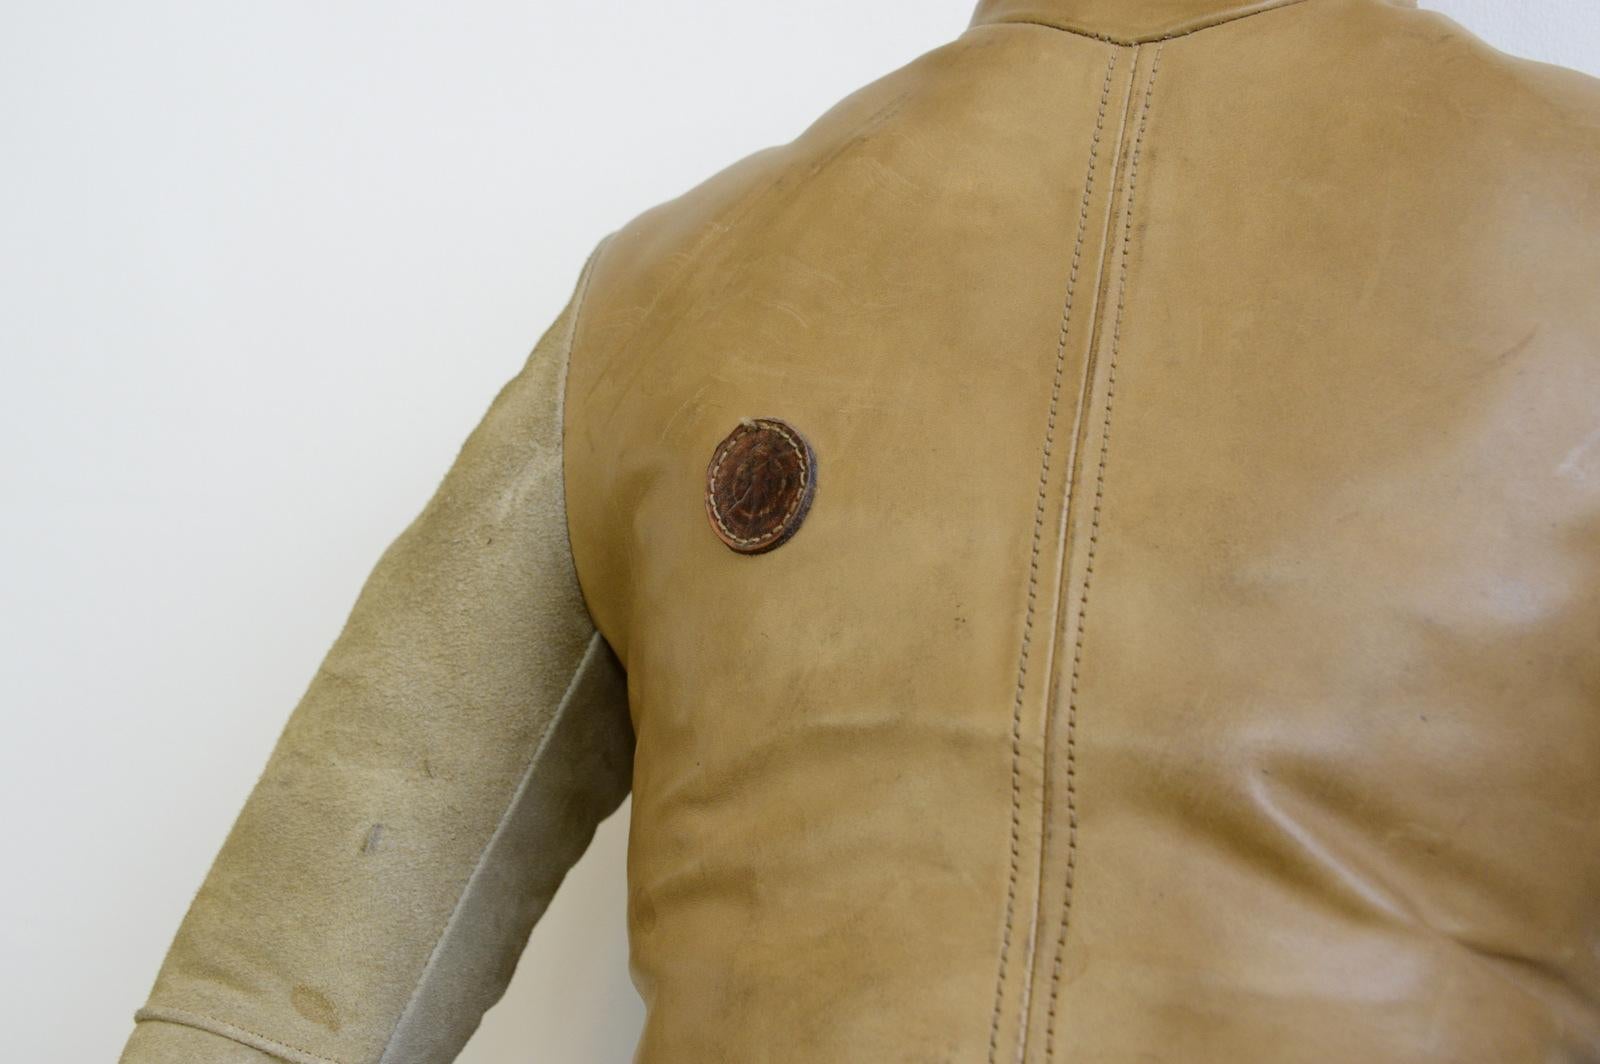 Czech leather wrestling dummy, circa 1950s

- Heavy tan leather
- Suede arms
- Leather lace up back
- Czech, 1950s
- Measures: 118 cm tall x 64 cm wide 21 cm deep

Condition report:

Some scuffs and age marks but no major damage.